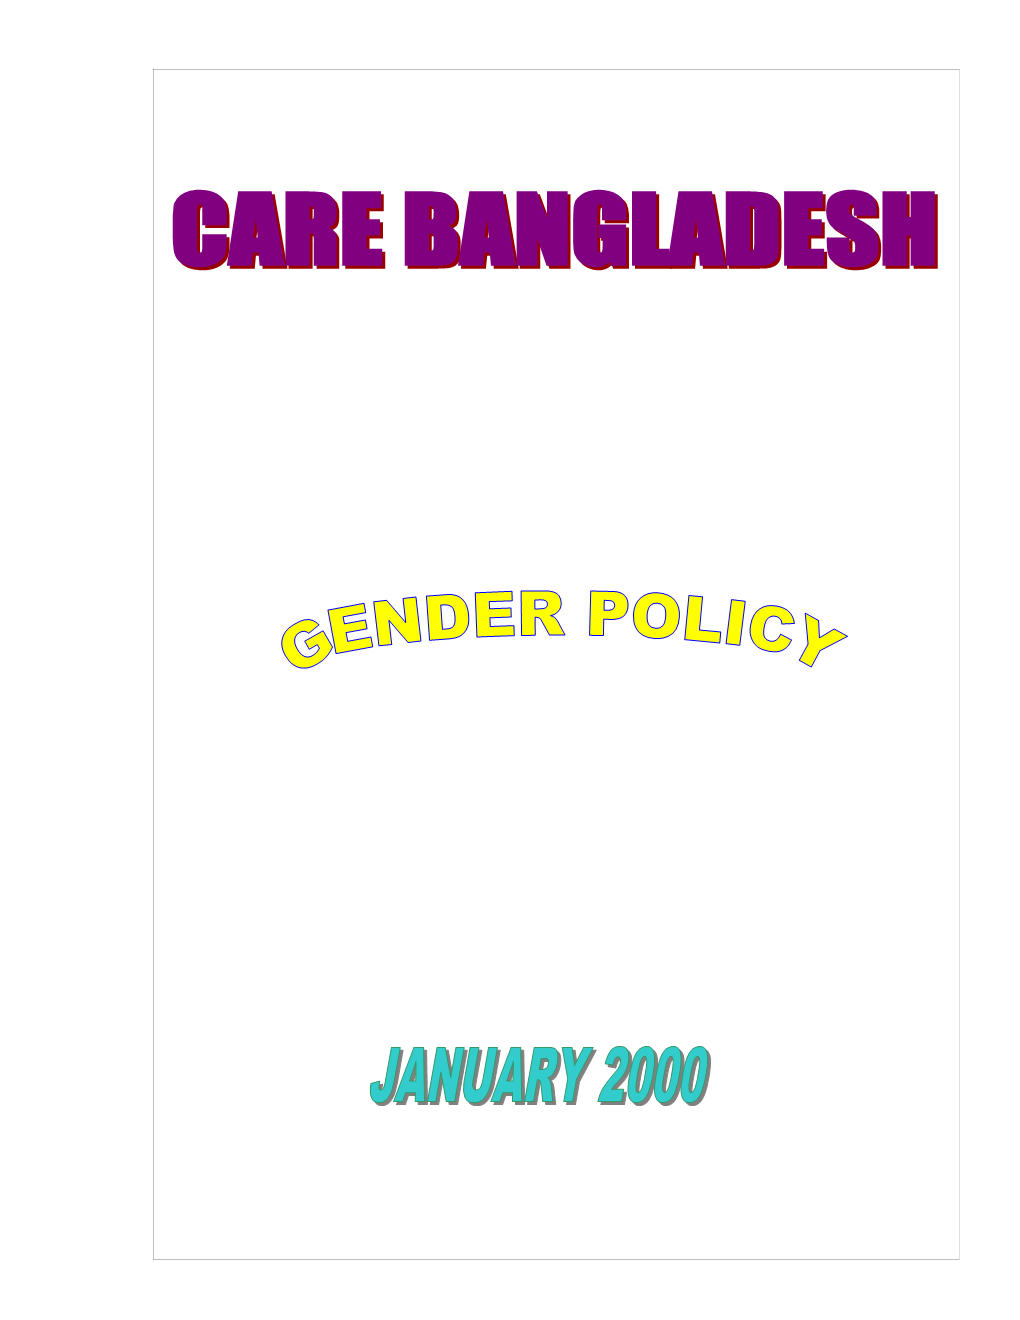 CARE Has Been Operating in Bangladesh Since the Country Gained Independence, Implementing